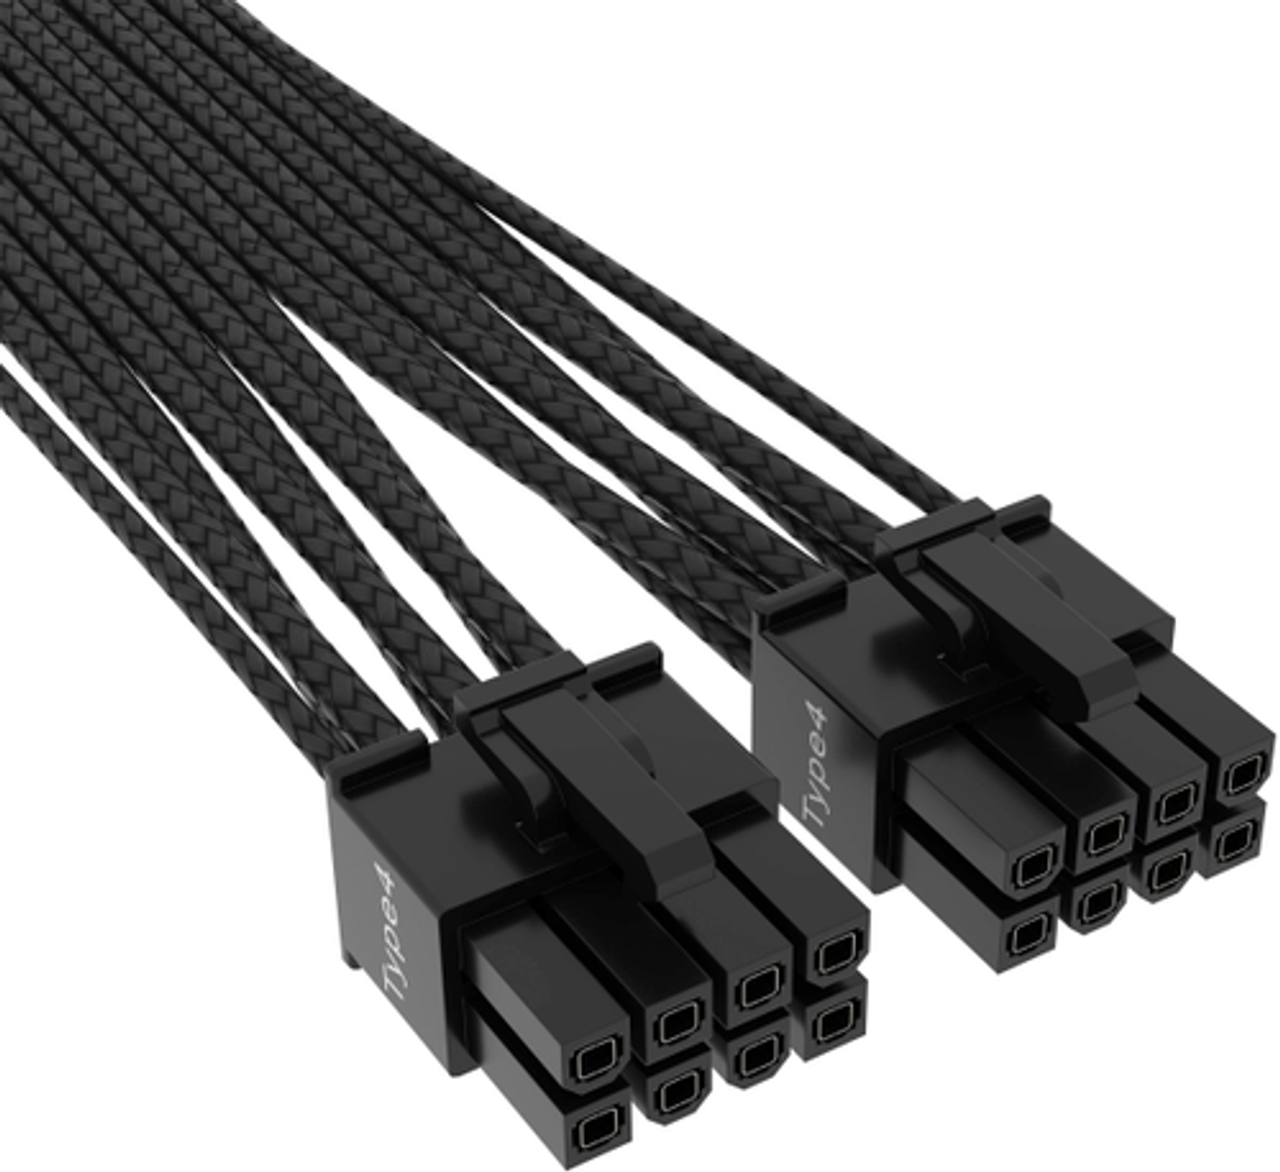 CORSAIR - 2’ Premium Individually Sleeved 12+4pin PCIe Gen 5 Type-4 600W 12VHPWR Cable - Black